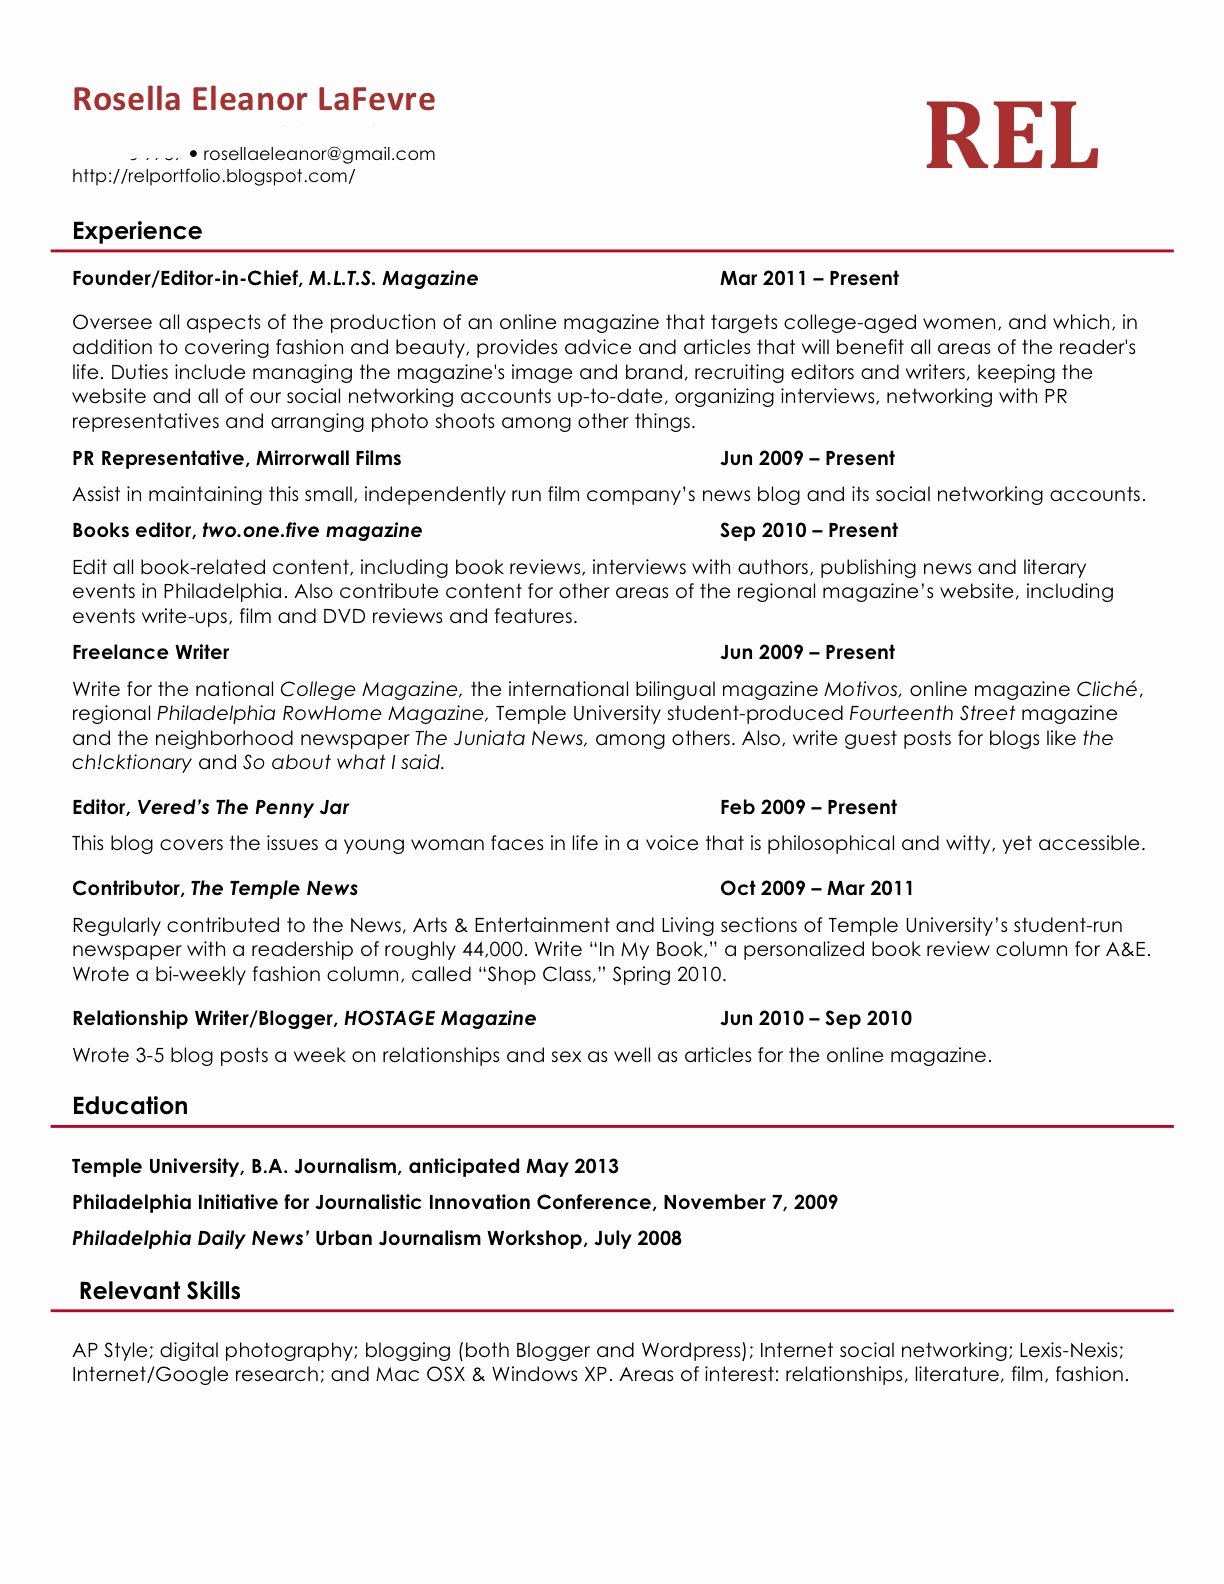 What A Resume Should Look Like In 2018